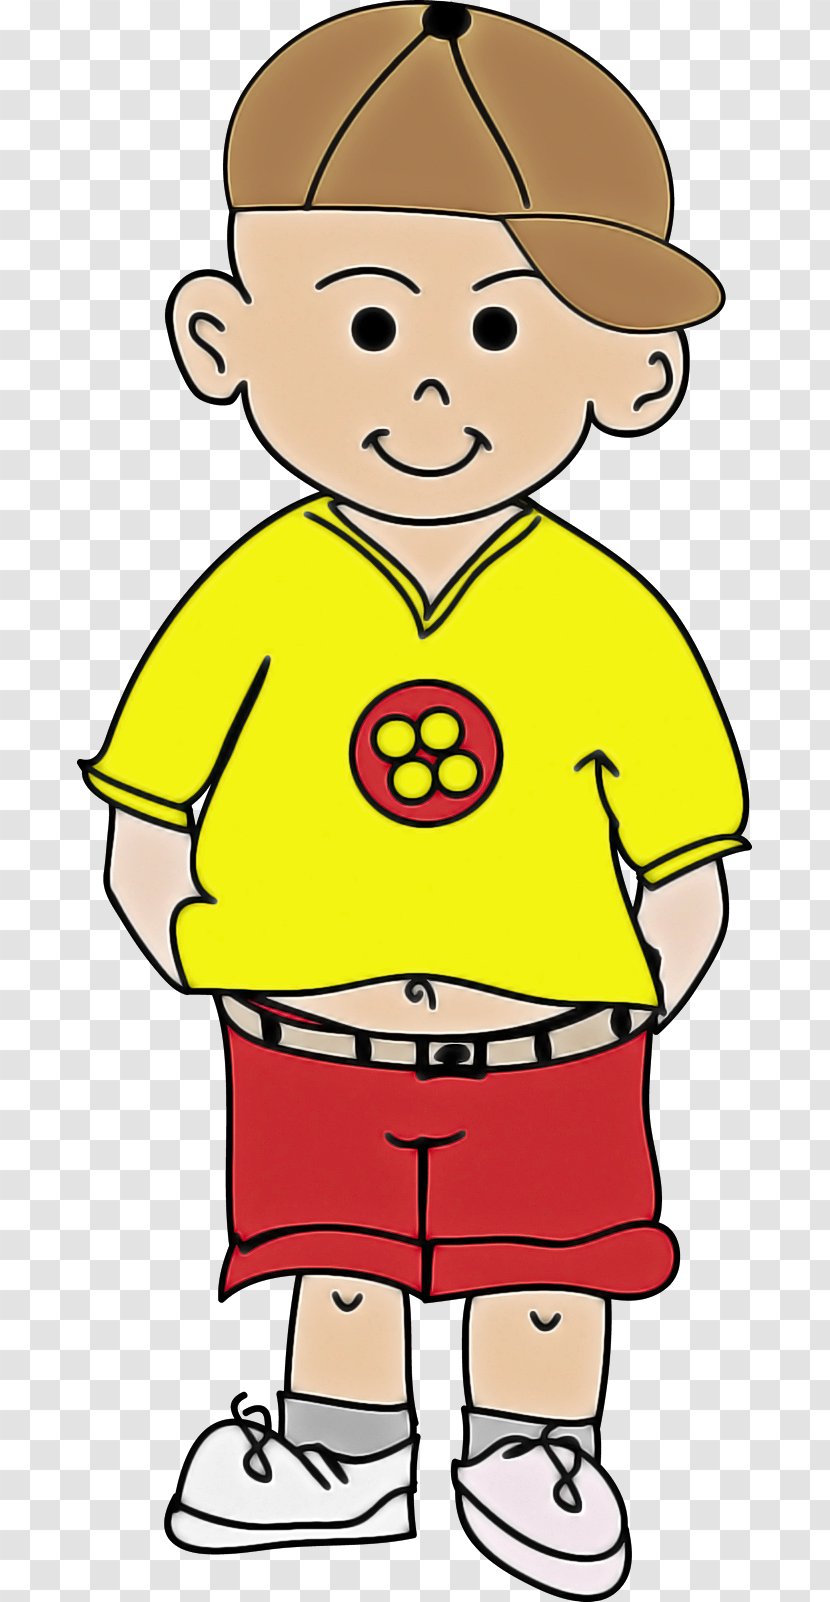 Cartoon Child Yellow Facial Expression Clip Art - Red - Male Smile Transparent PNG